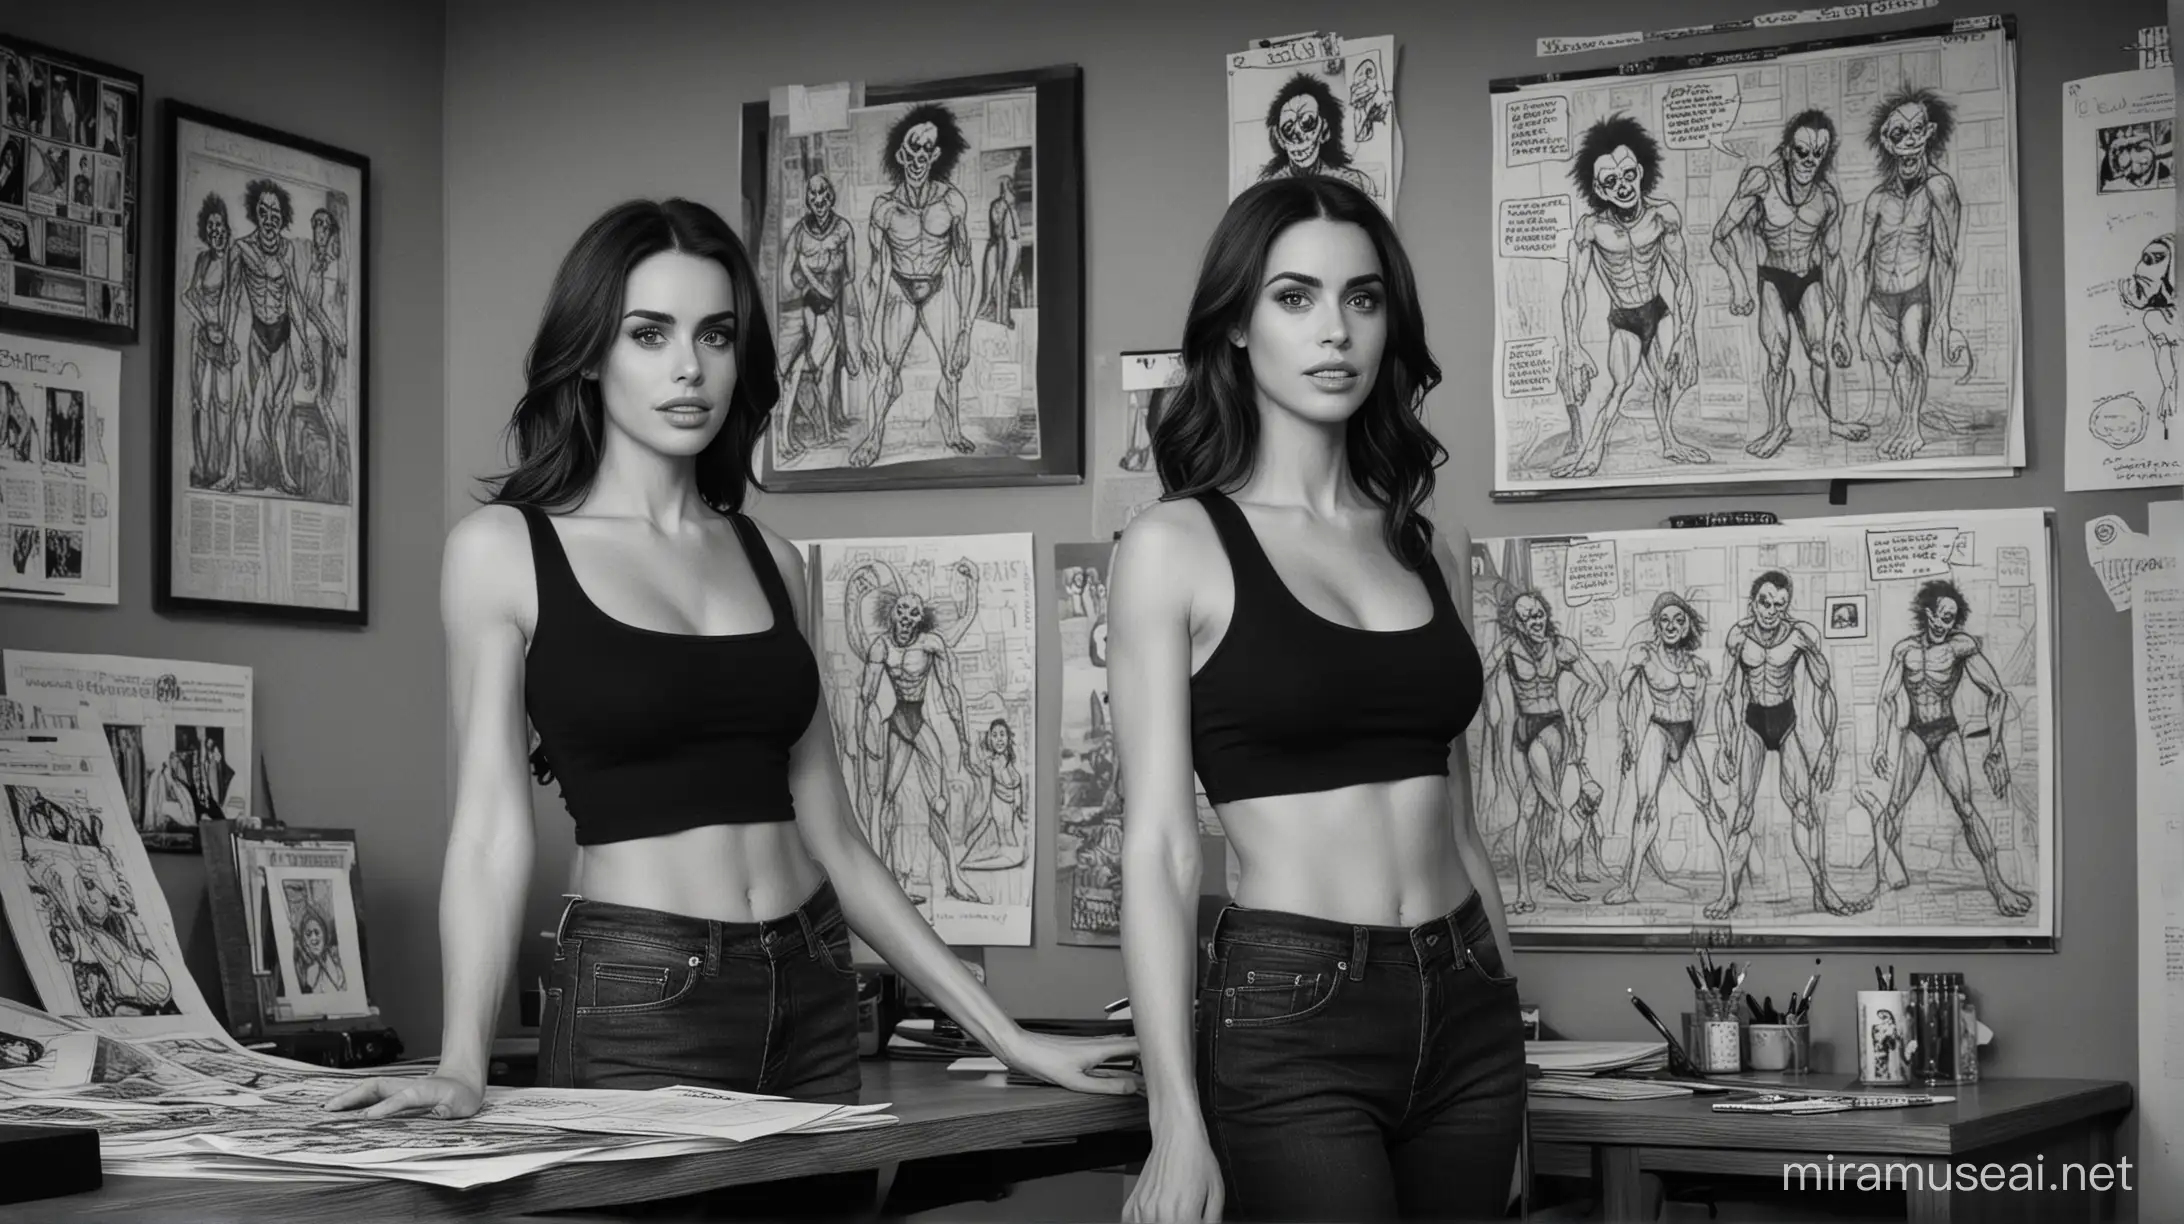 Jessica Lowndes Contemplates Mutant Hybrid Storyboards in Dimly Lit Office